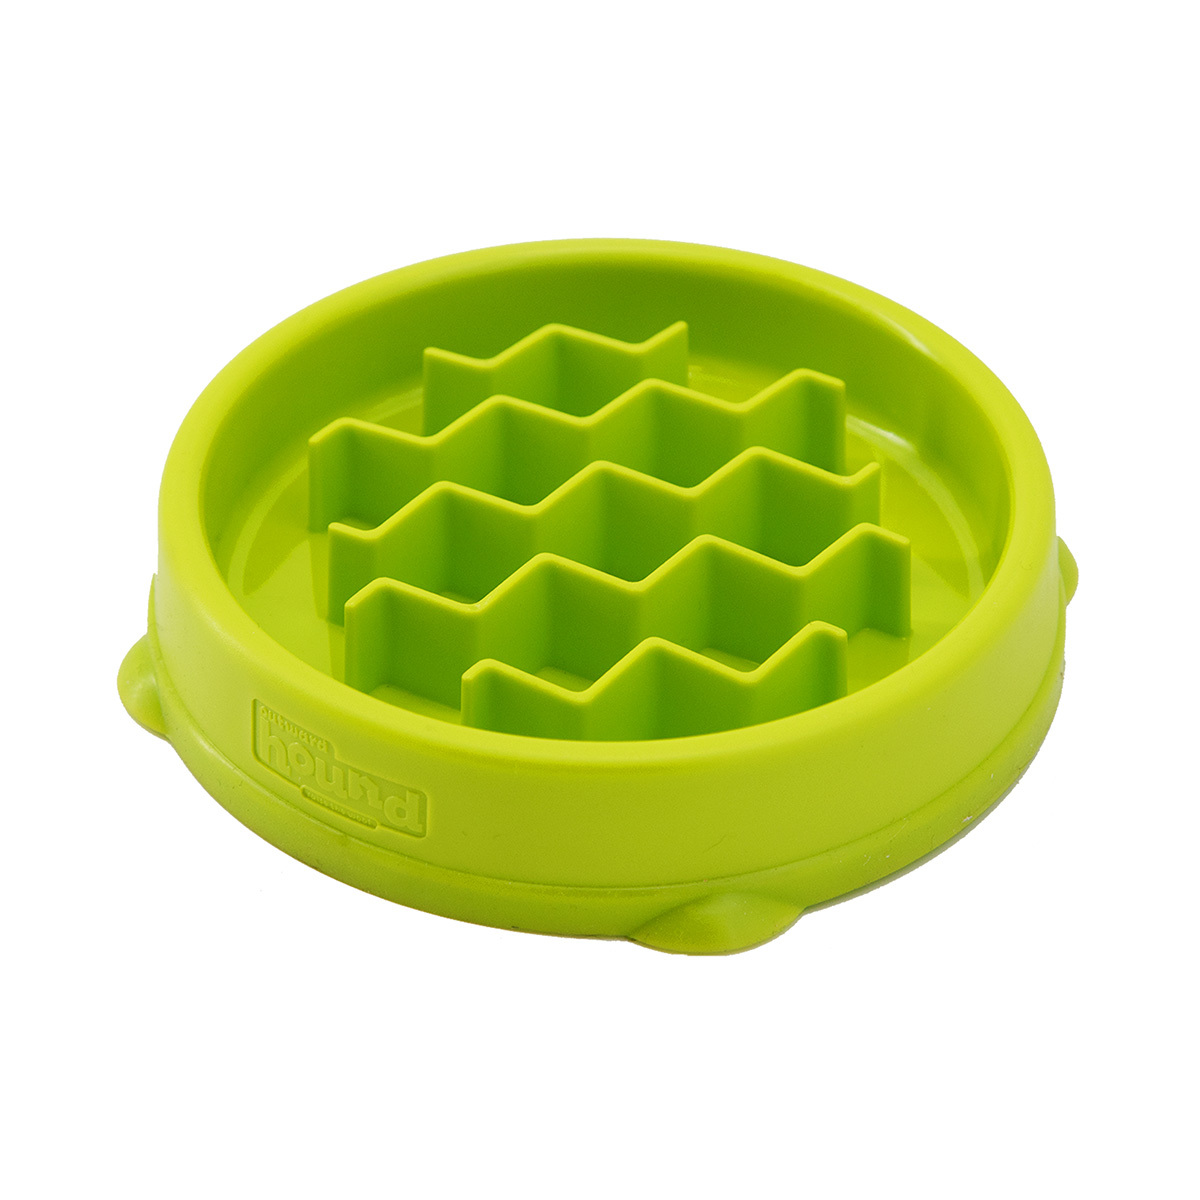 Petstages Cat Fun Feeder Green Wave Slow Food Bowl for Cats - Green image 3